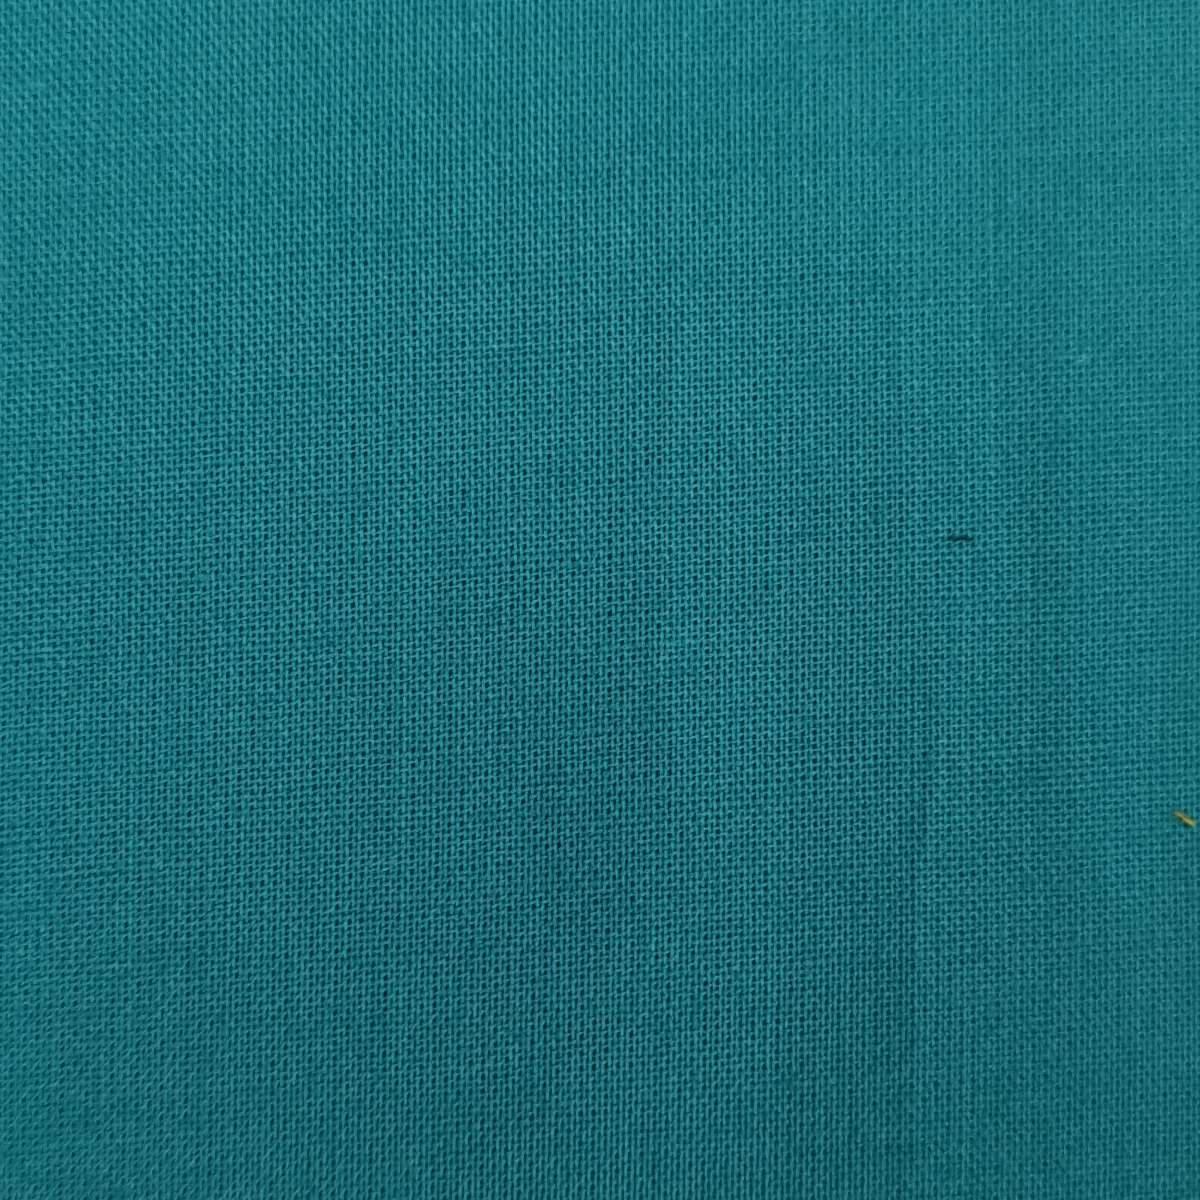 60'S Voil Woven Fabric-Eastern Blue